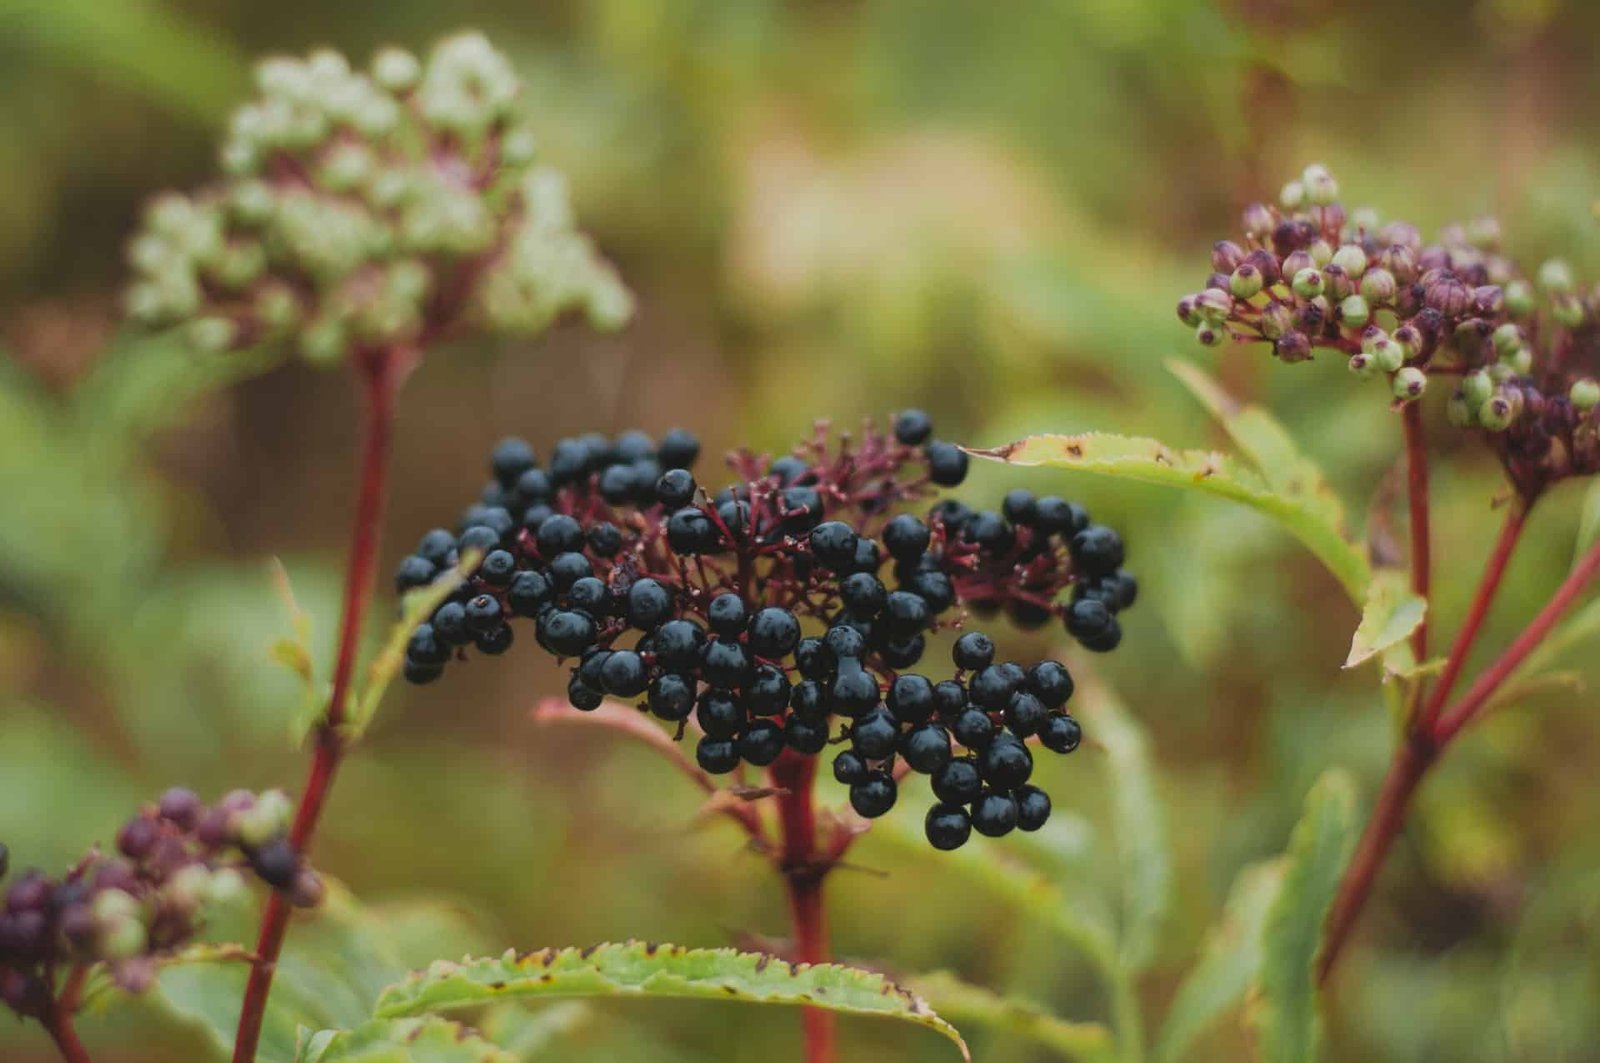 tinctures made from elderberry fruit are a natural herb immunity remedy that is ideal for the common cold and other health ailments